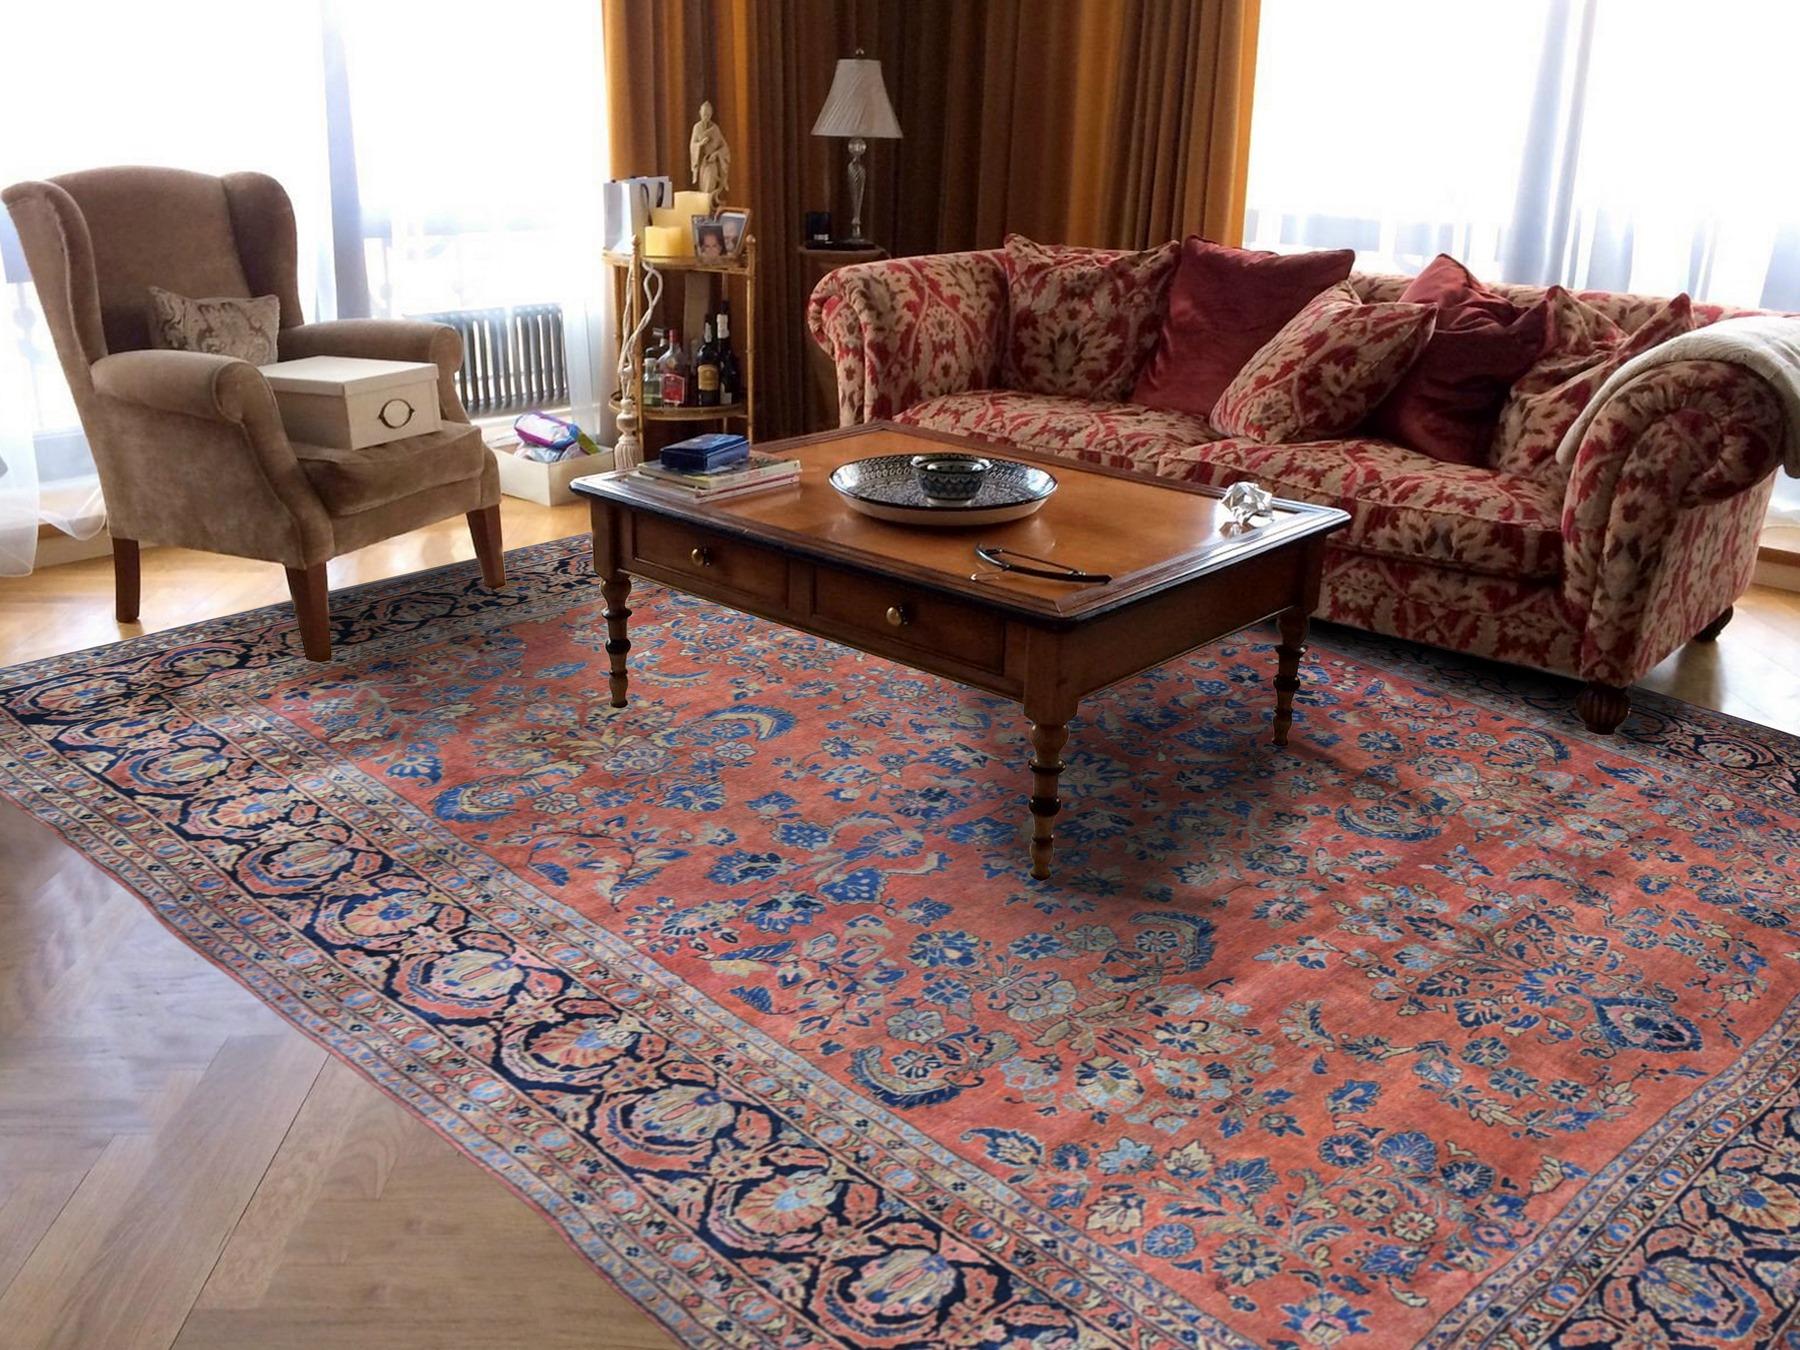 This is a truly genuine one-of-a-kind red antique persian sarouk even wear clean and soft hand knotted rug. It has been knotted for months and months in the centuries-old persian weaving craftsmanship techniques by expert artisans.

Primary